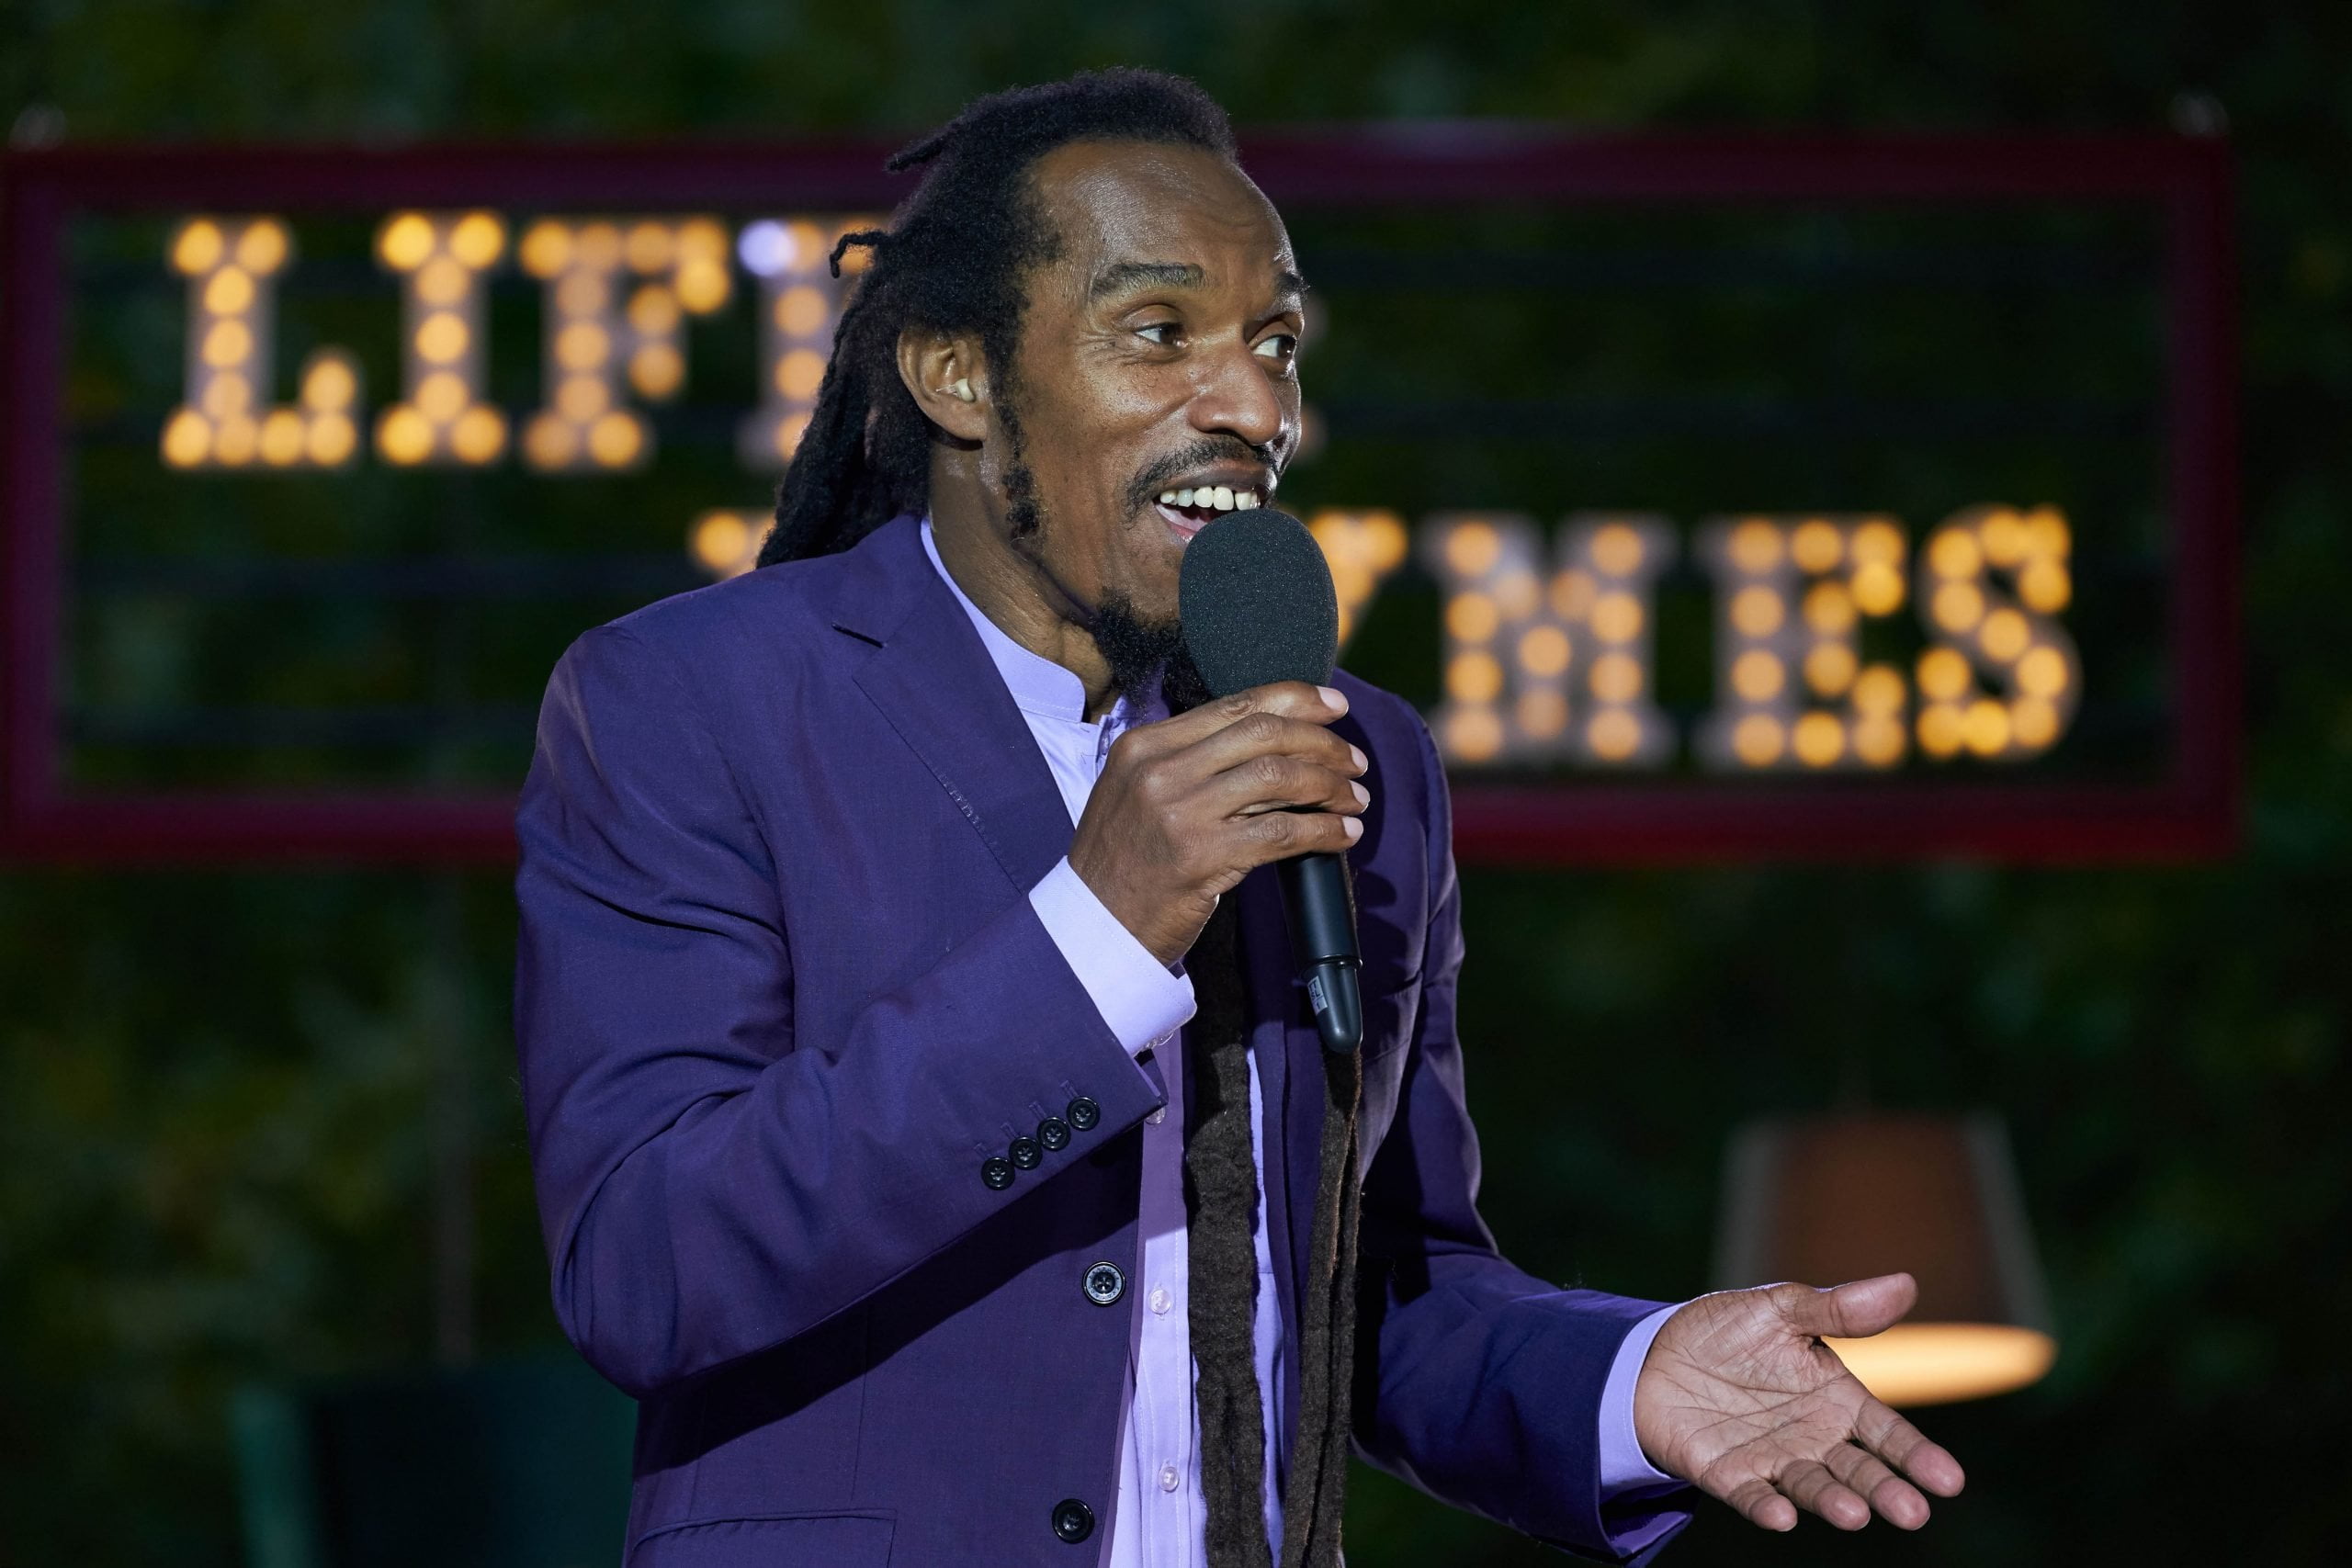 Photo of a man speaking into a microphone with dreadlocks in a ponytail and a blue suit